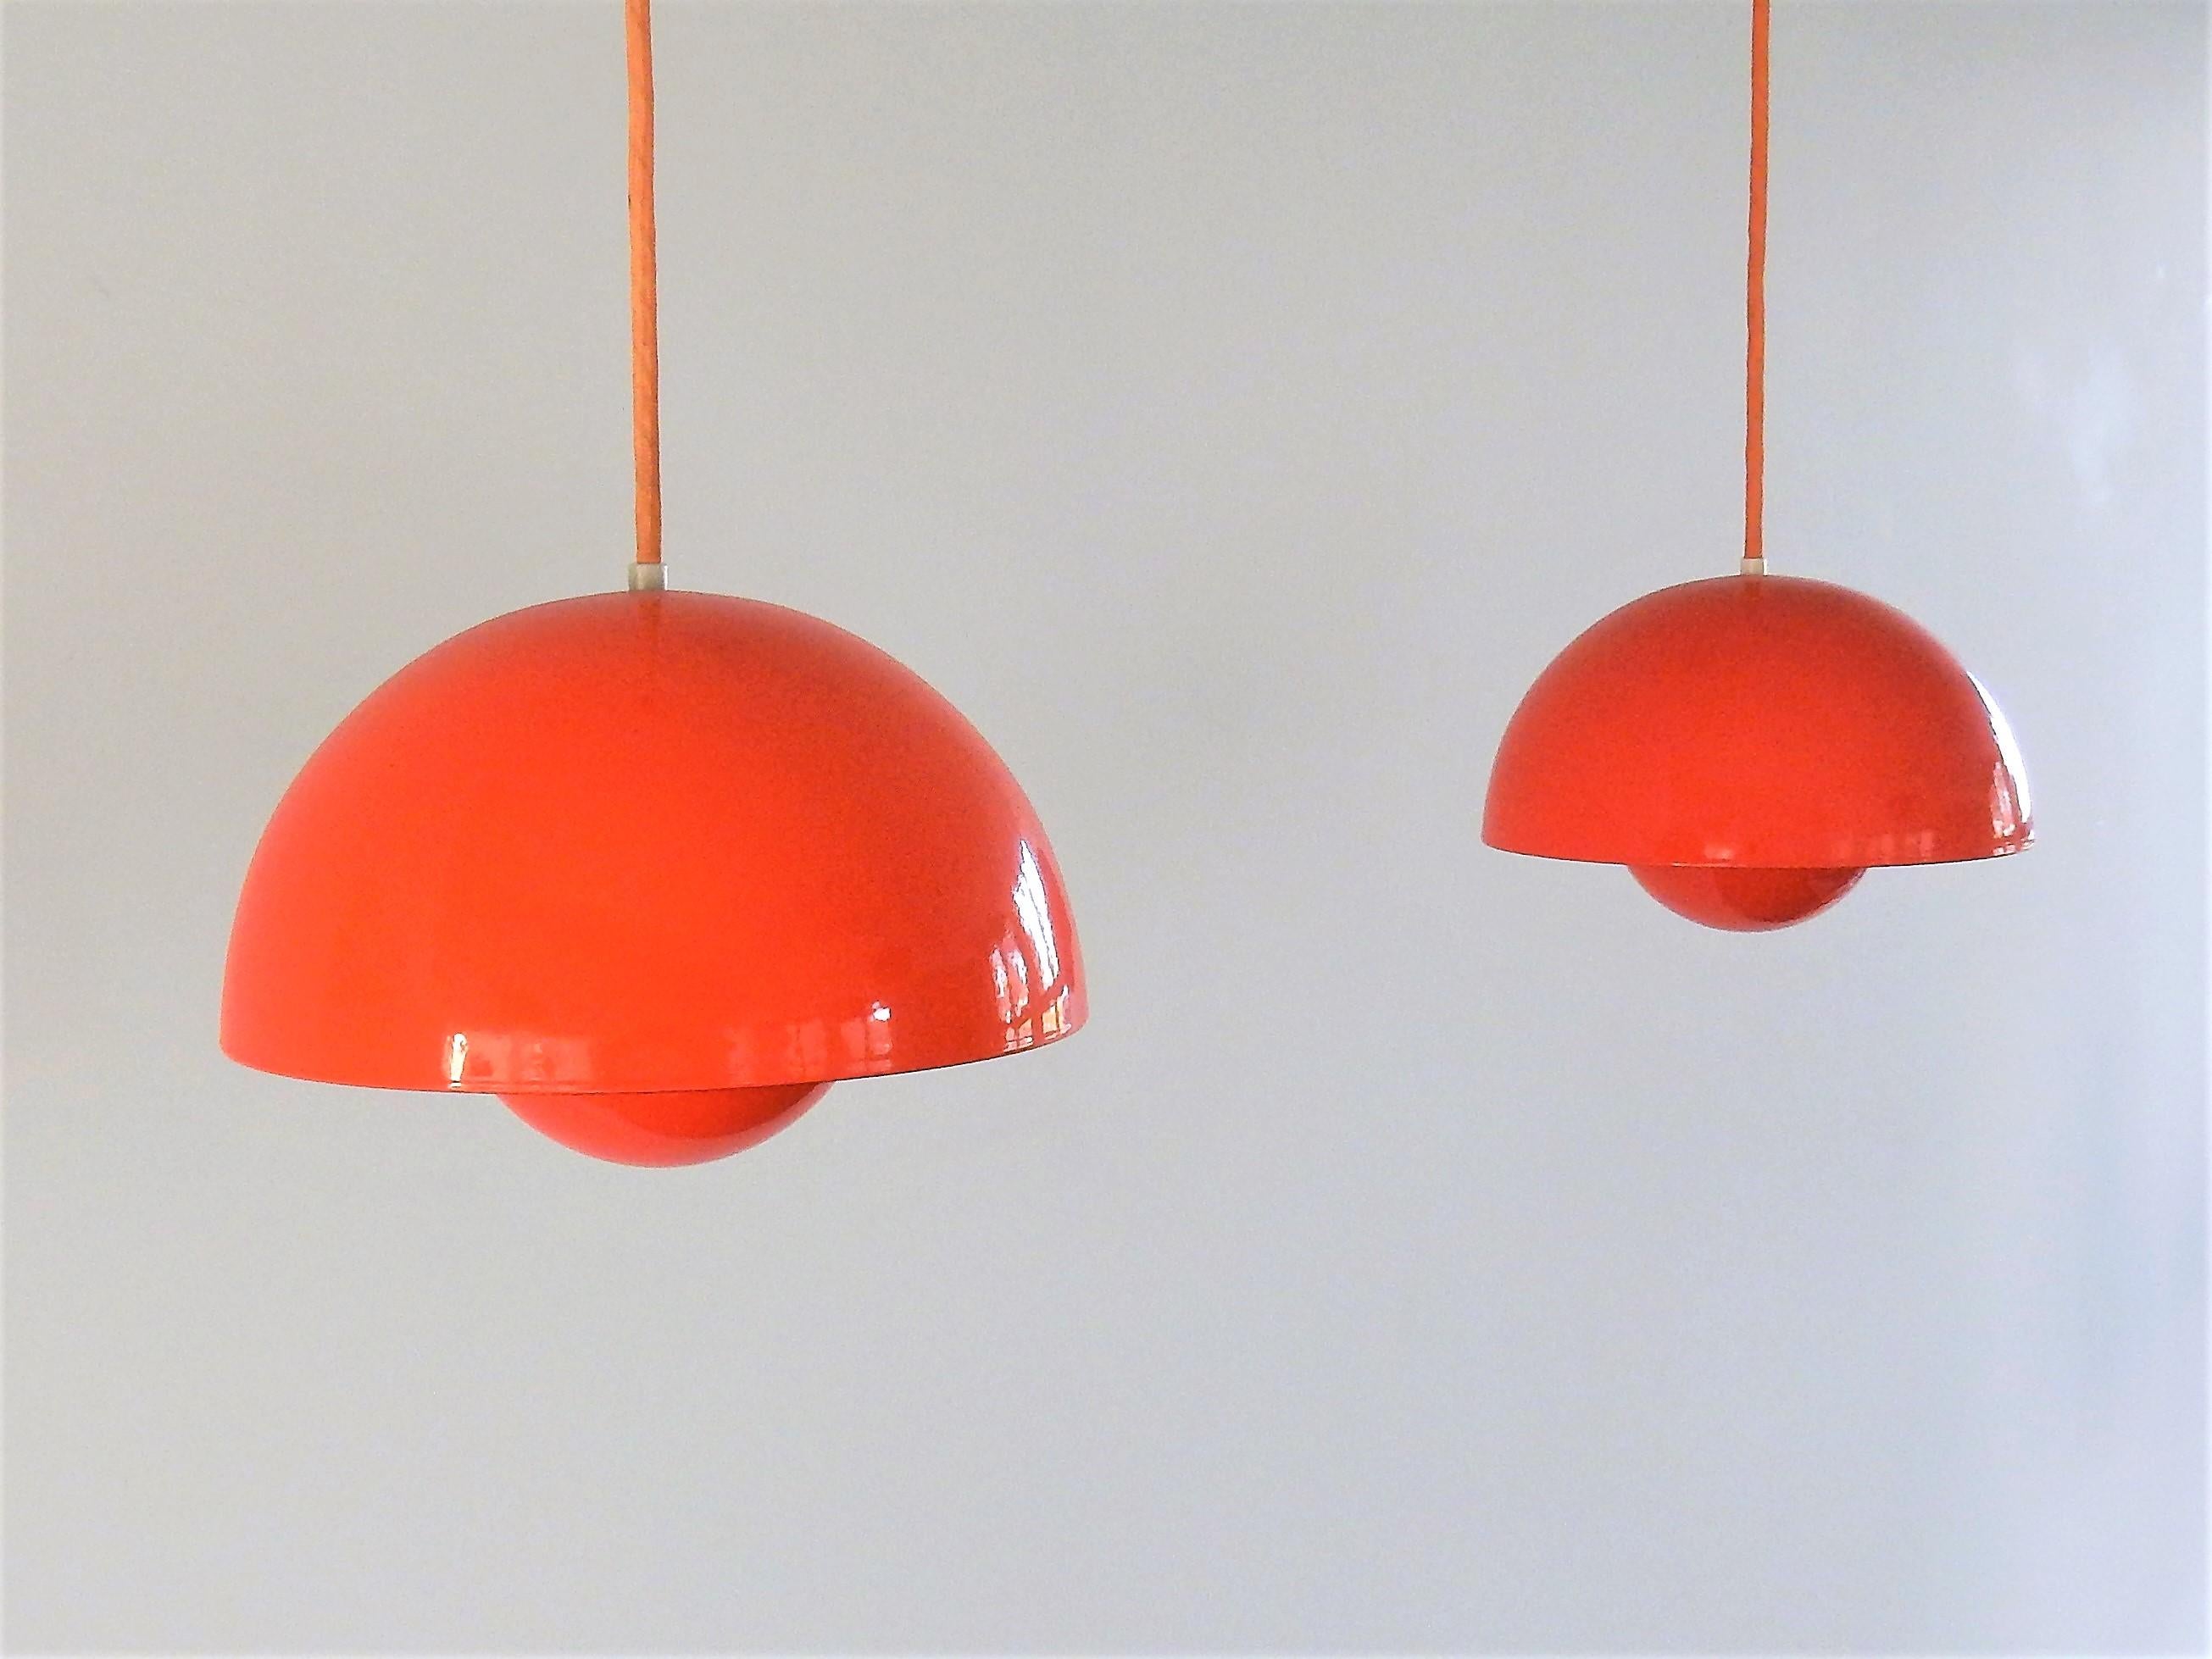 This set of 2 red enameled flowerpot lamps, no. 16562, was designed by Verner Panton for Louis Poulsen. The lamps have a red enameled finish outside and bright white enameled inside. The reflector shade has red enamel on both sides that gives a nice